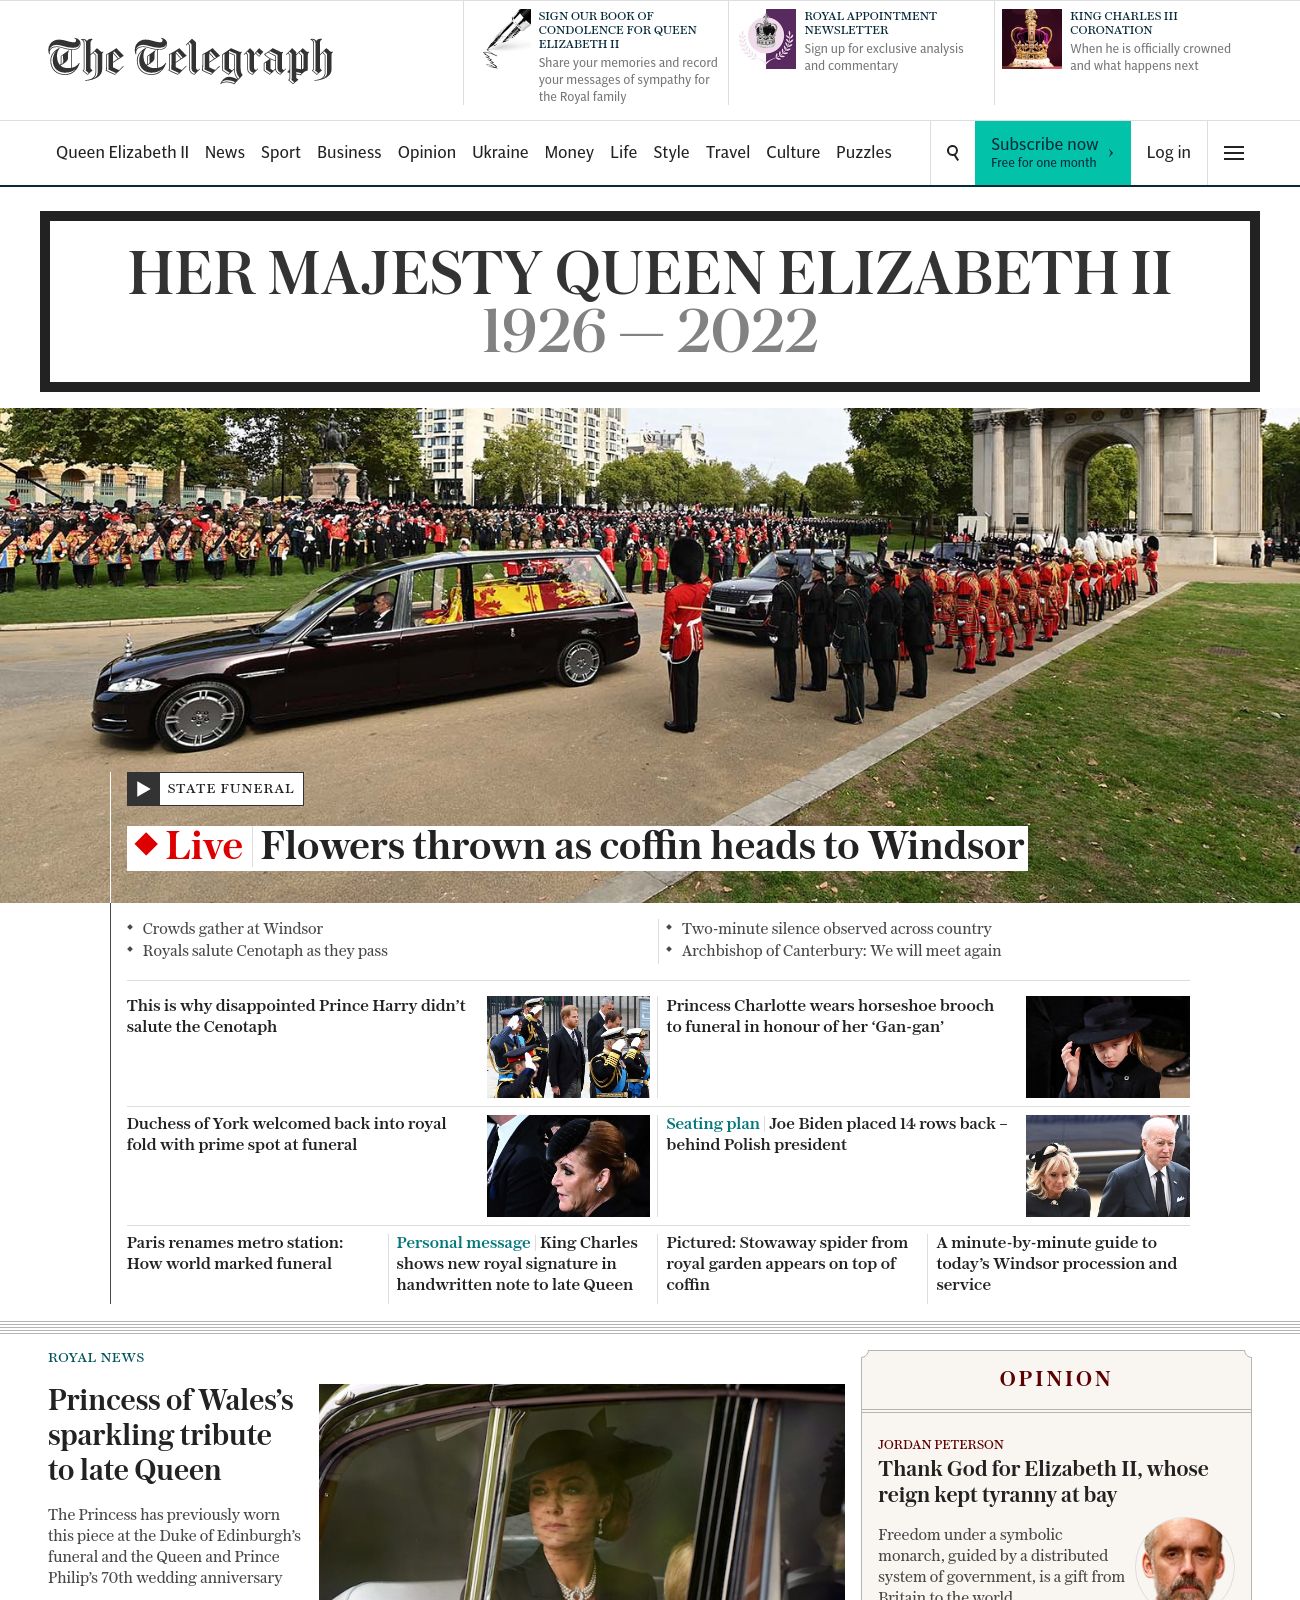 The Telegraph at 2022-09-19 15:06:25+01:00 local time